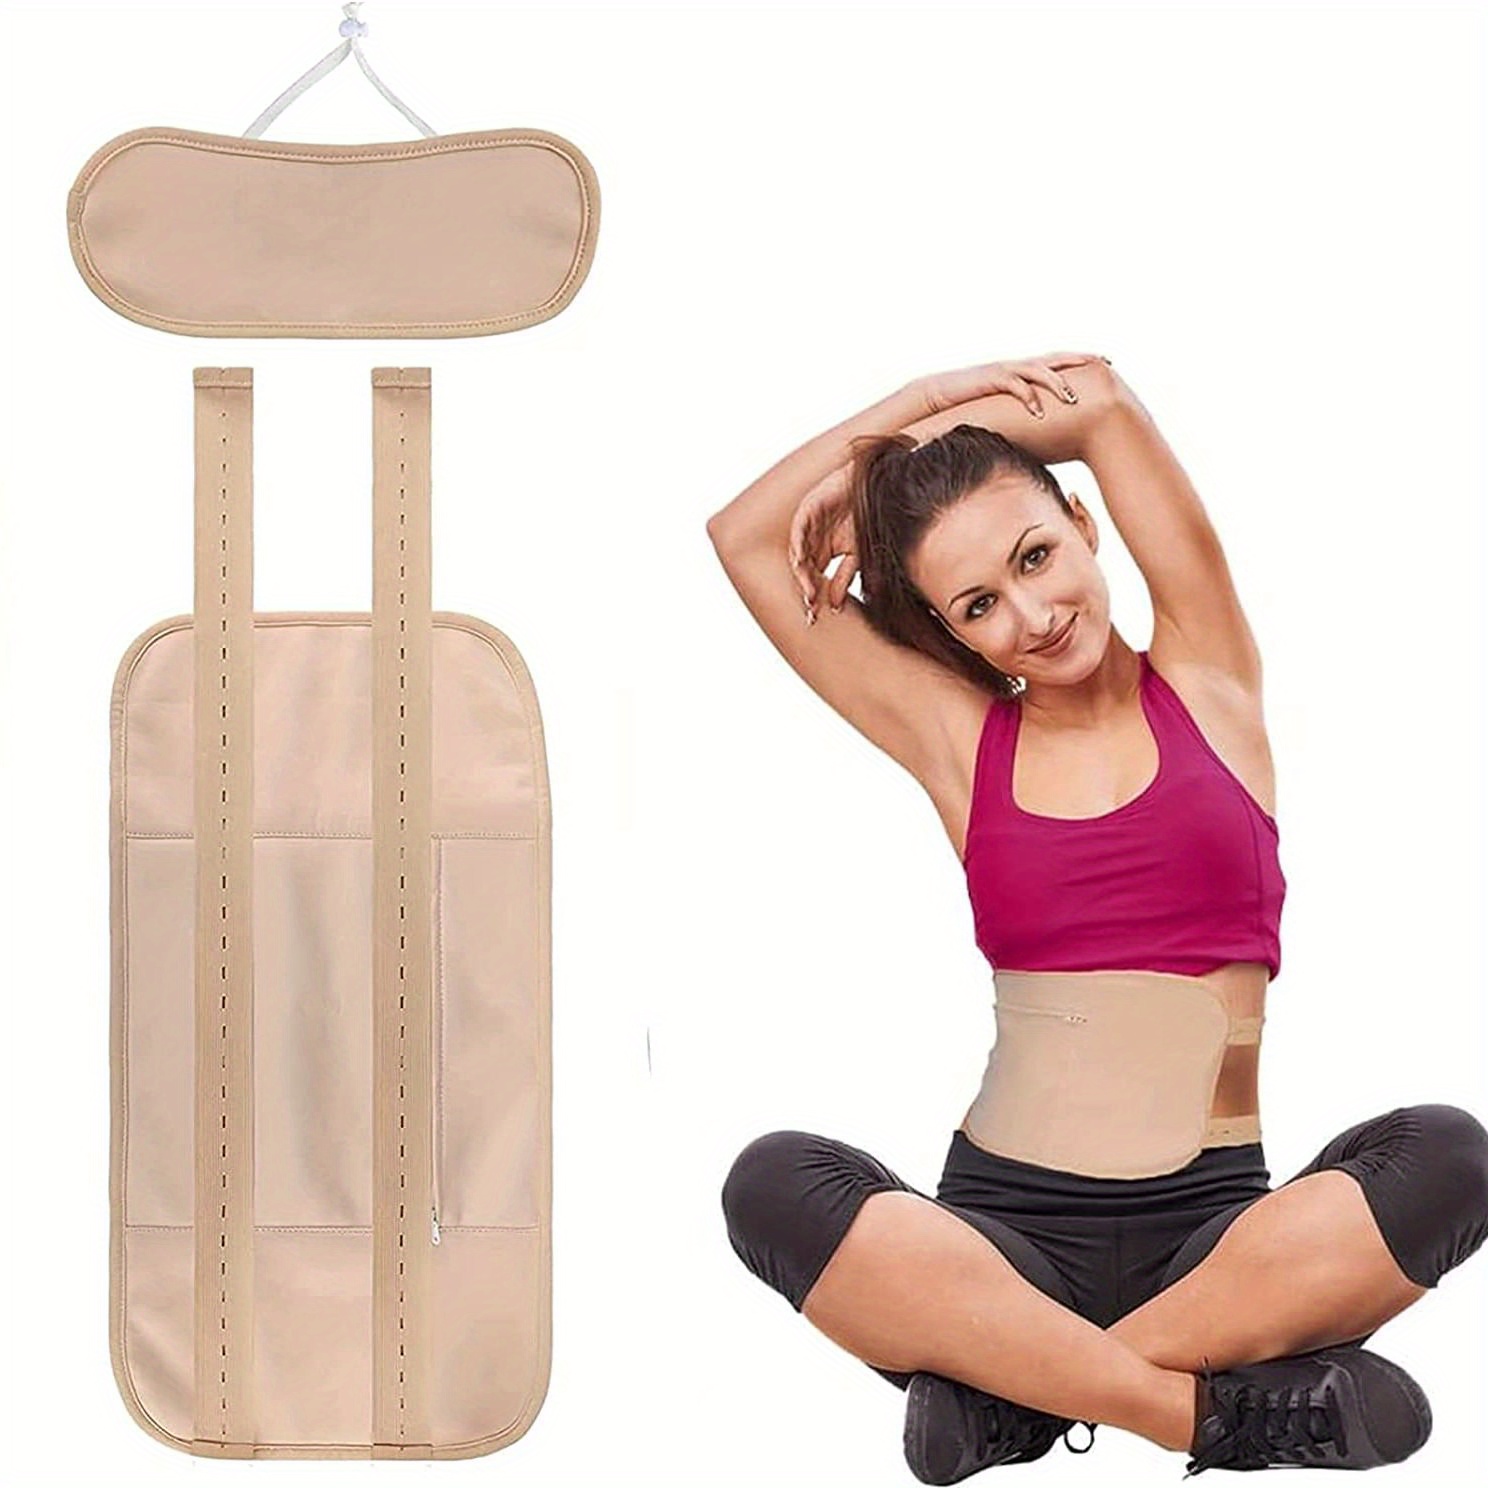  Saluaqui Reusable Castor Oil Pack Elastic Strap, Reduce  Stress, Improve Sleep with Compression Wrap, for Liver Detoxification, Lymphatic  Drainage : Health & Household